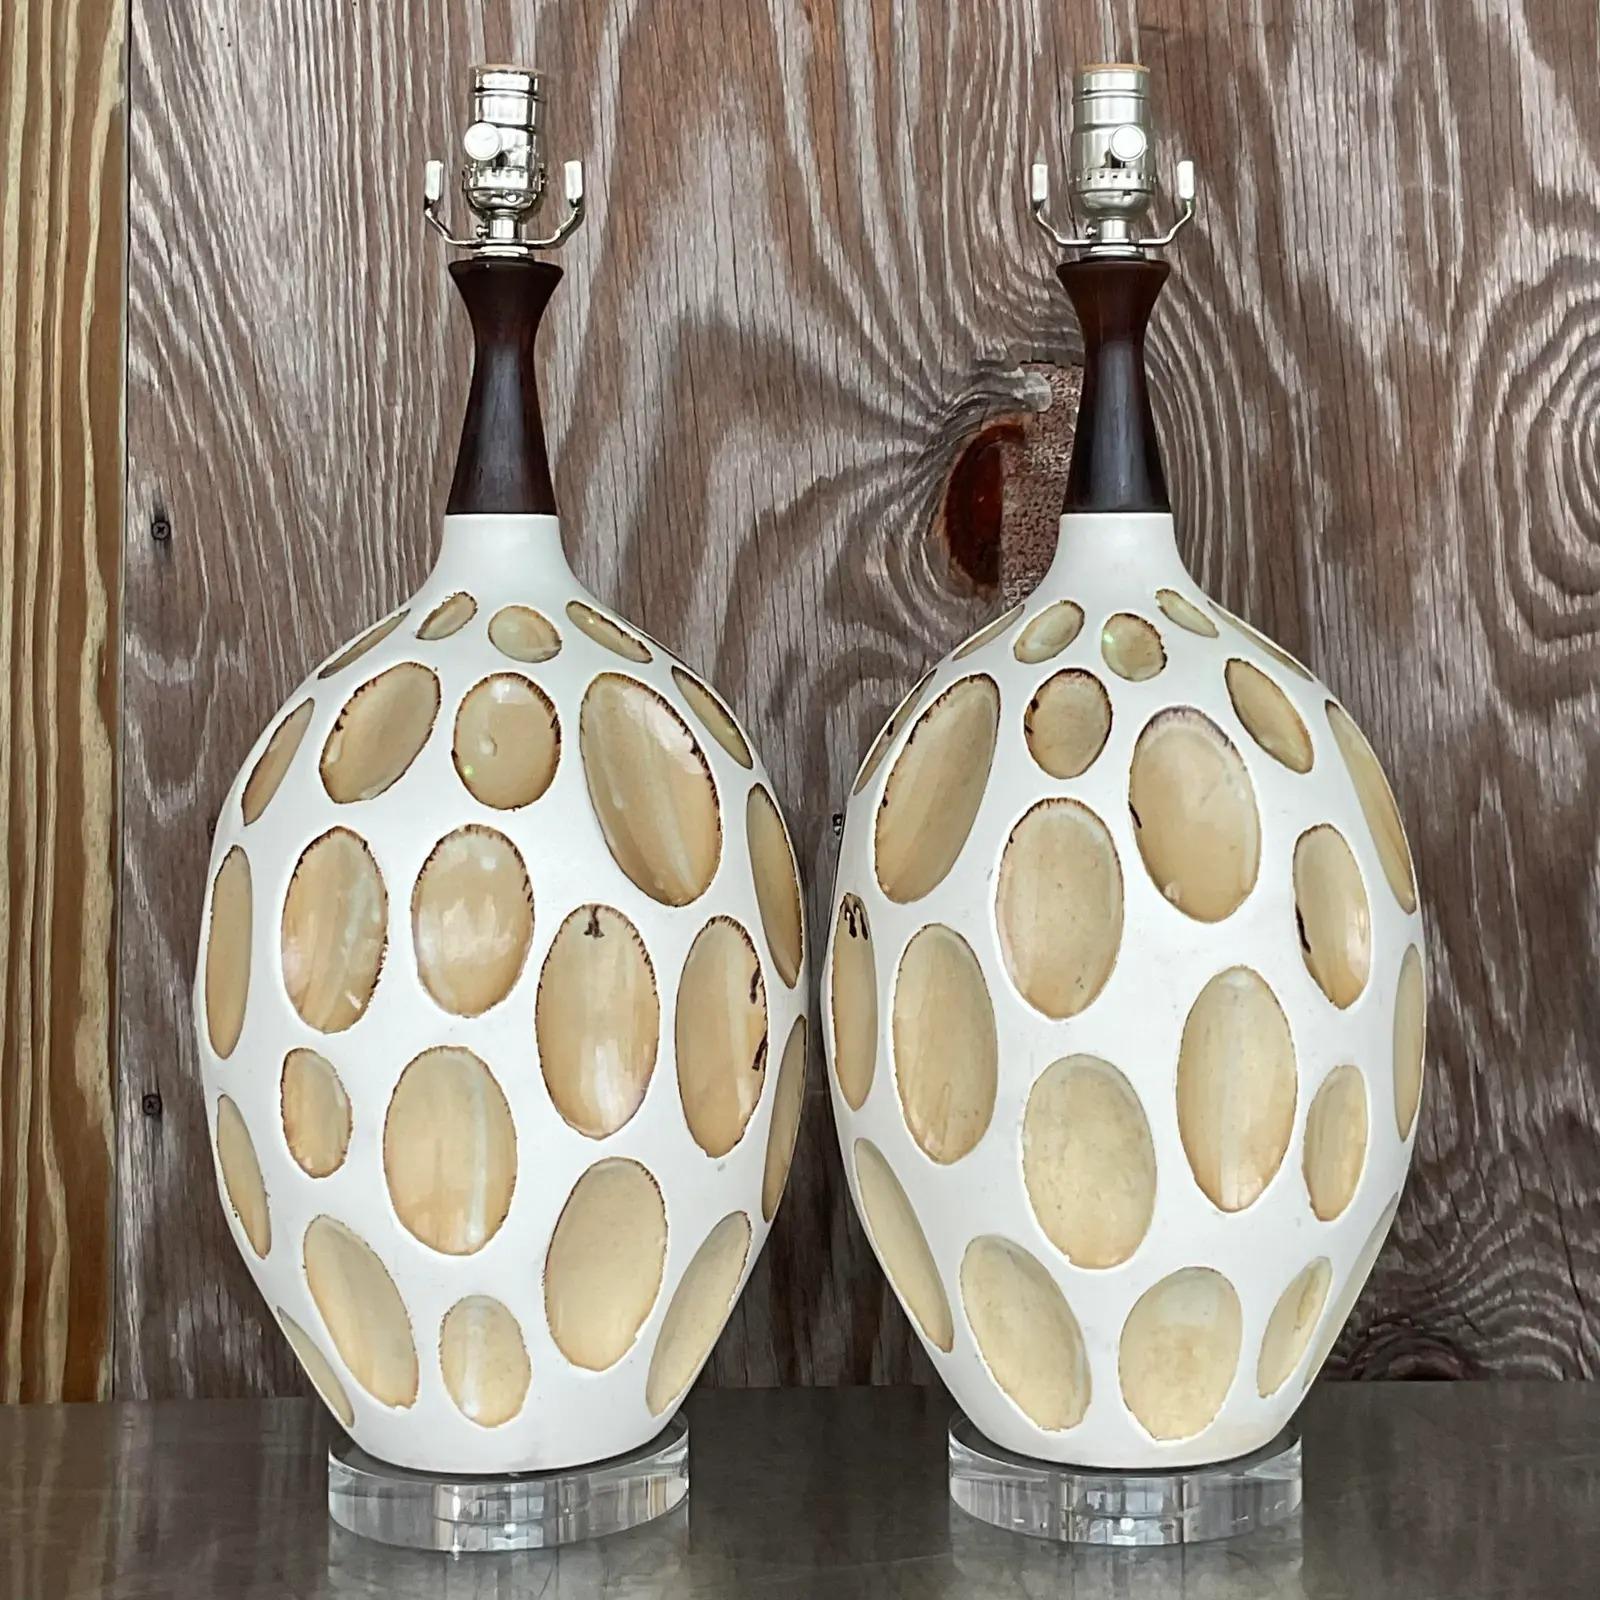 A fantastic pair of vintage MCM table lamps. Beautiful crater design with a matte glazed finish. Fully restored with all new hardware and wiring. Acquired from a Palm Beach estate.